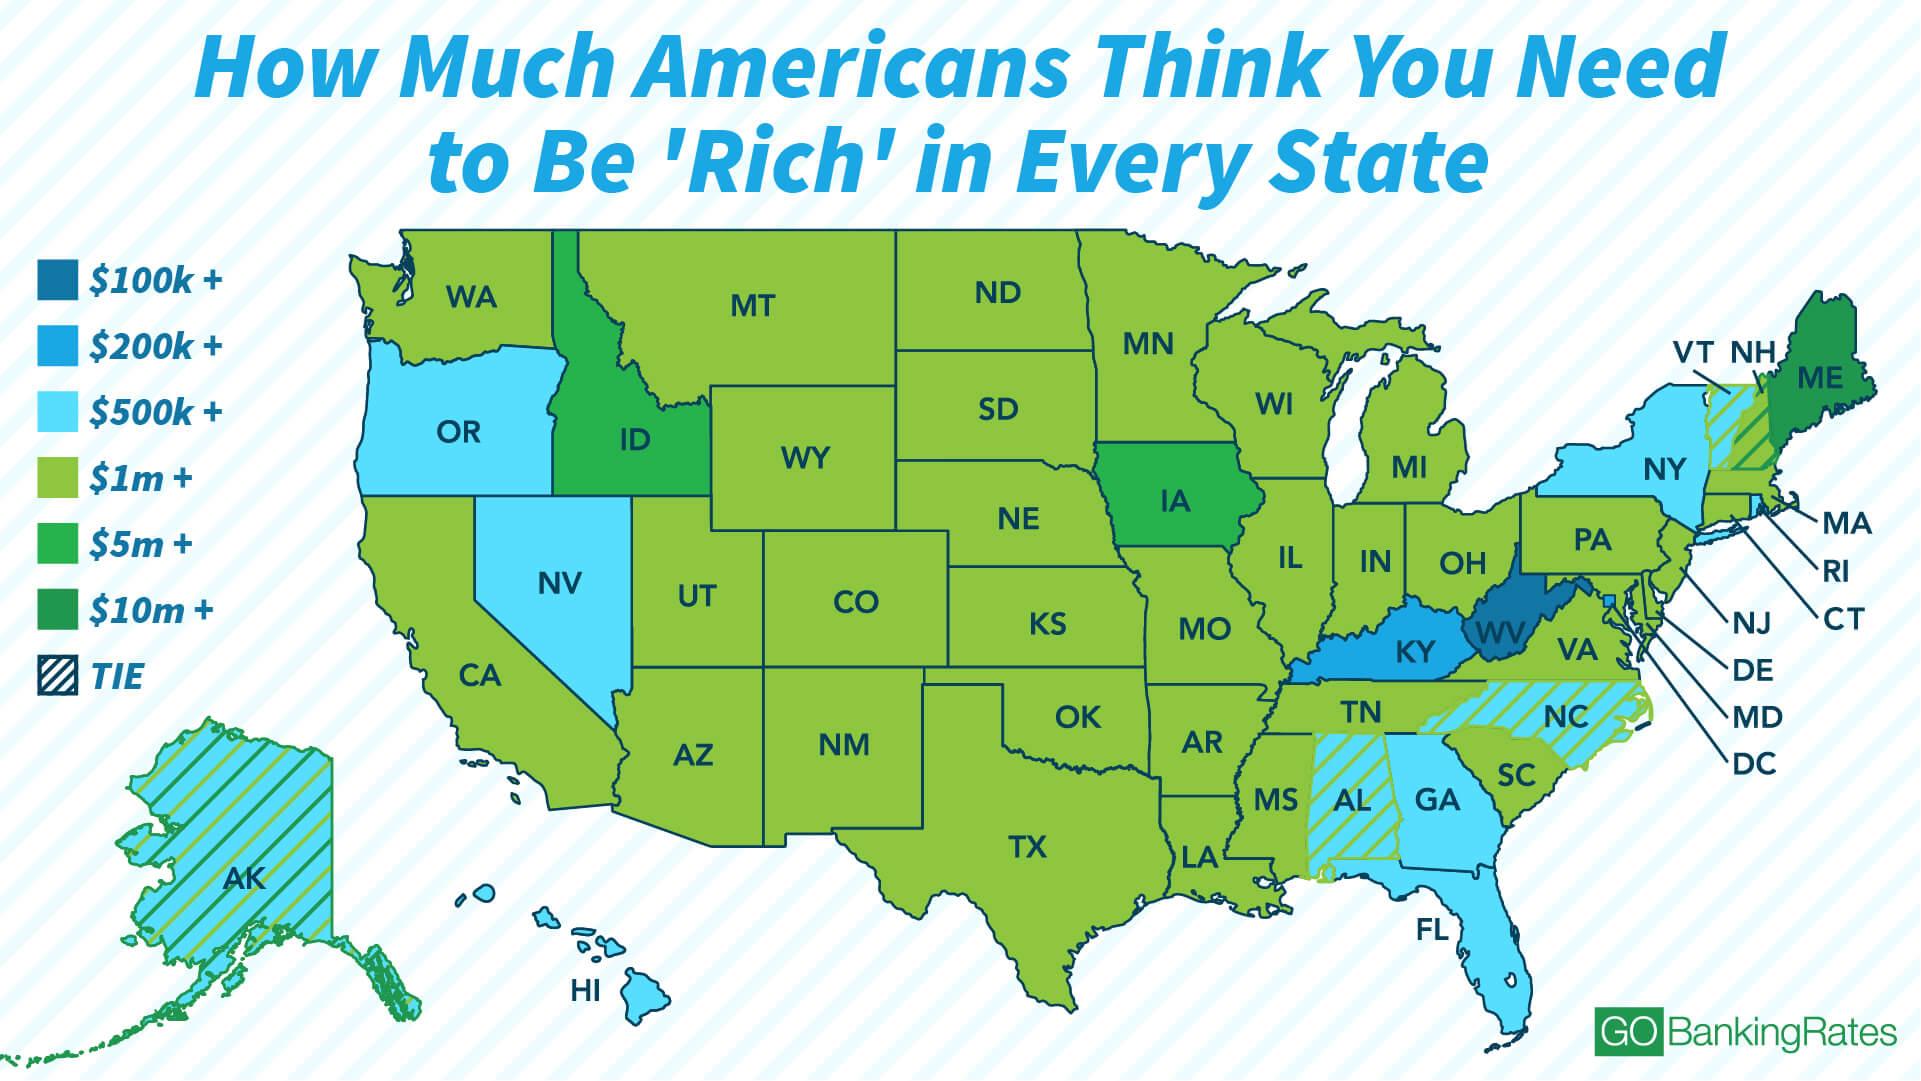 How Much Americans Think You Need to Be "Rich" in Every State